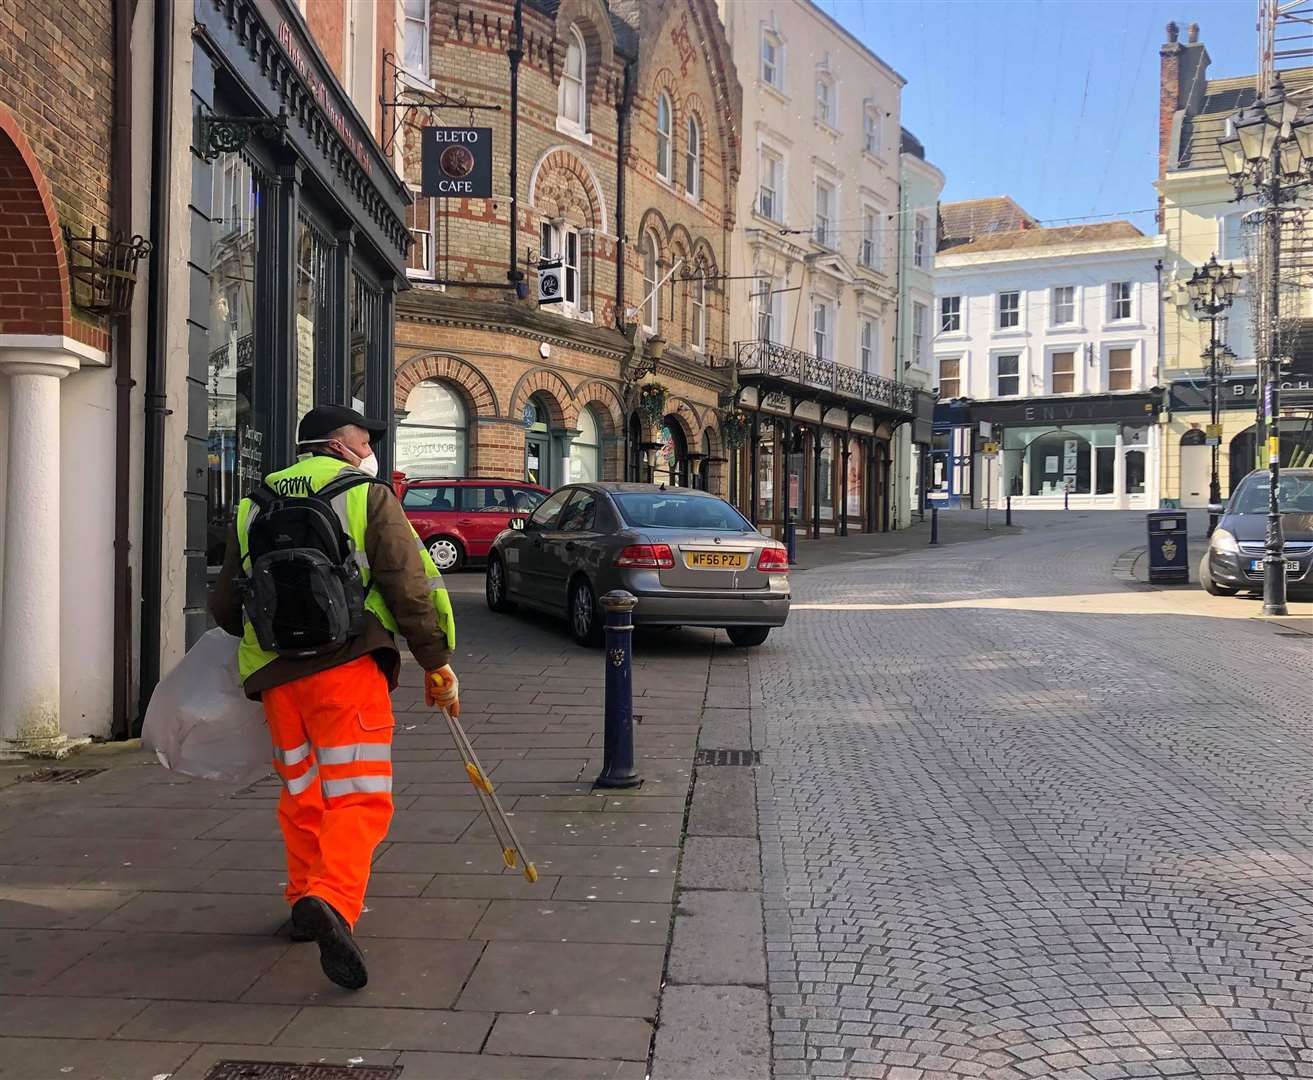 The Folkestone Town Sprucer team are committed to cleaning the streets of Folkestone during lockdown. All pictures: Peter Philips